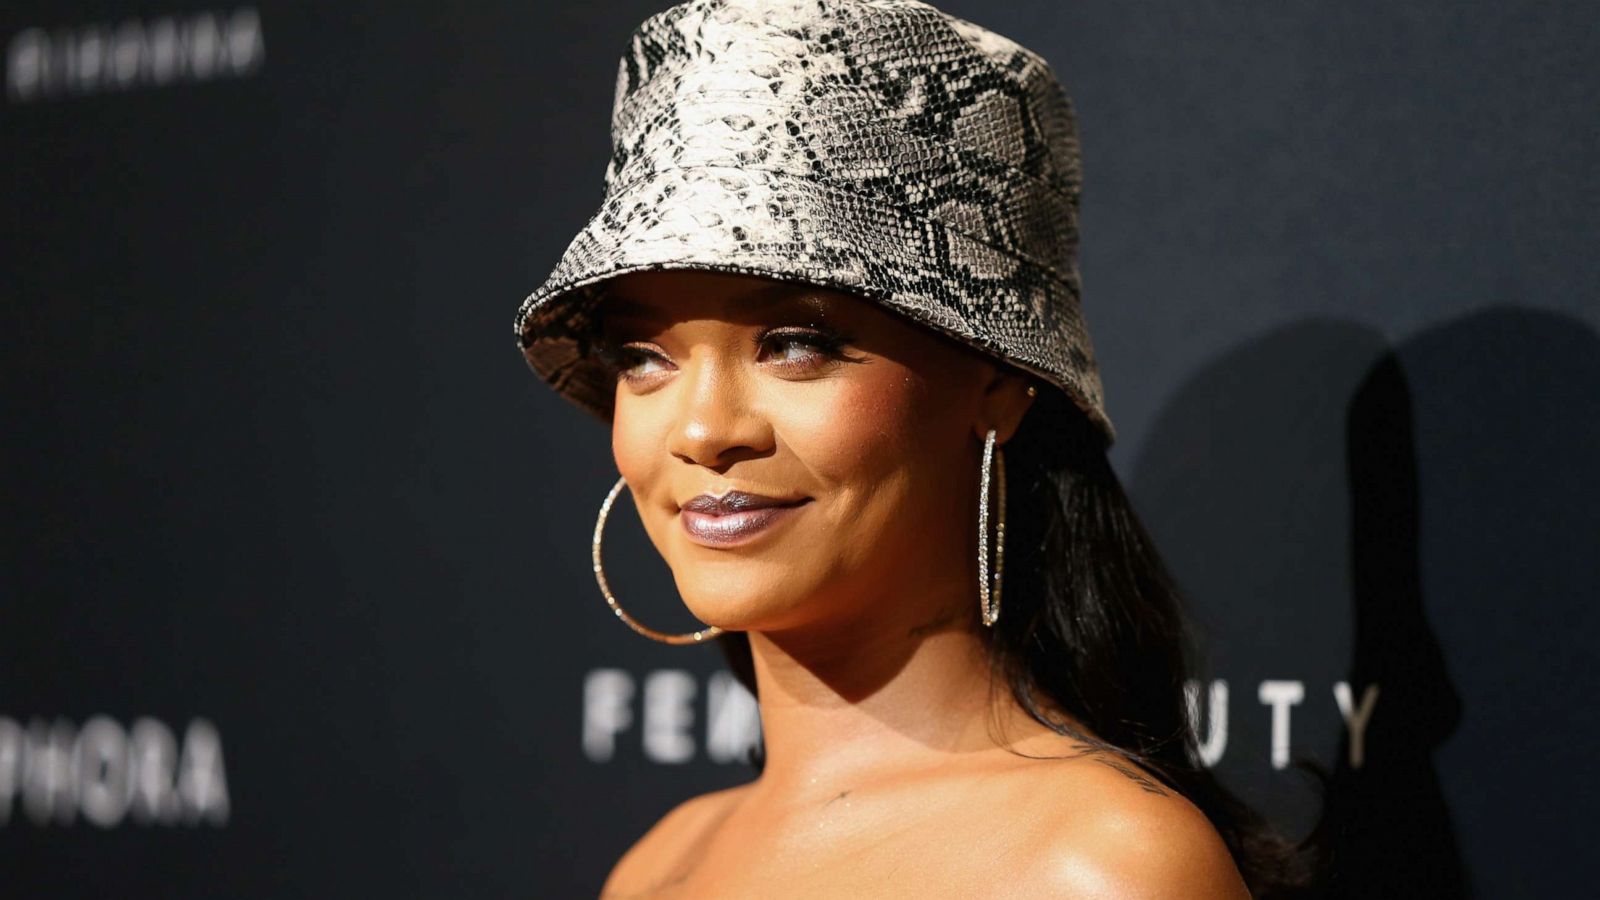 Rihanna Starting Clothing Line With LVMH - New Celebrity Fashion Brand